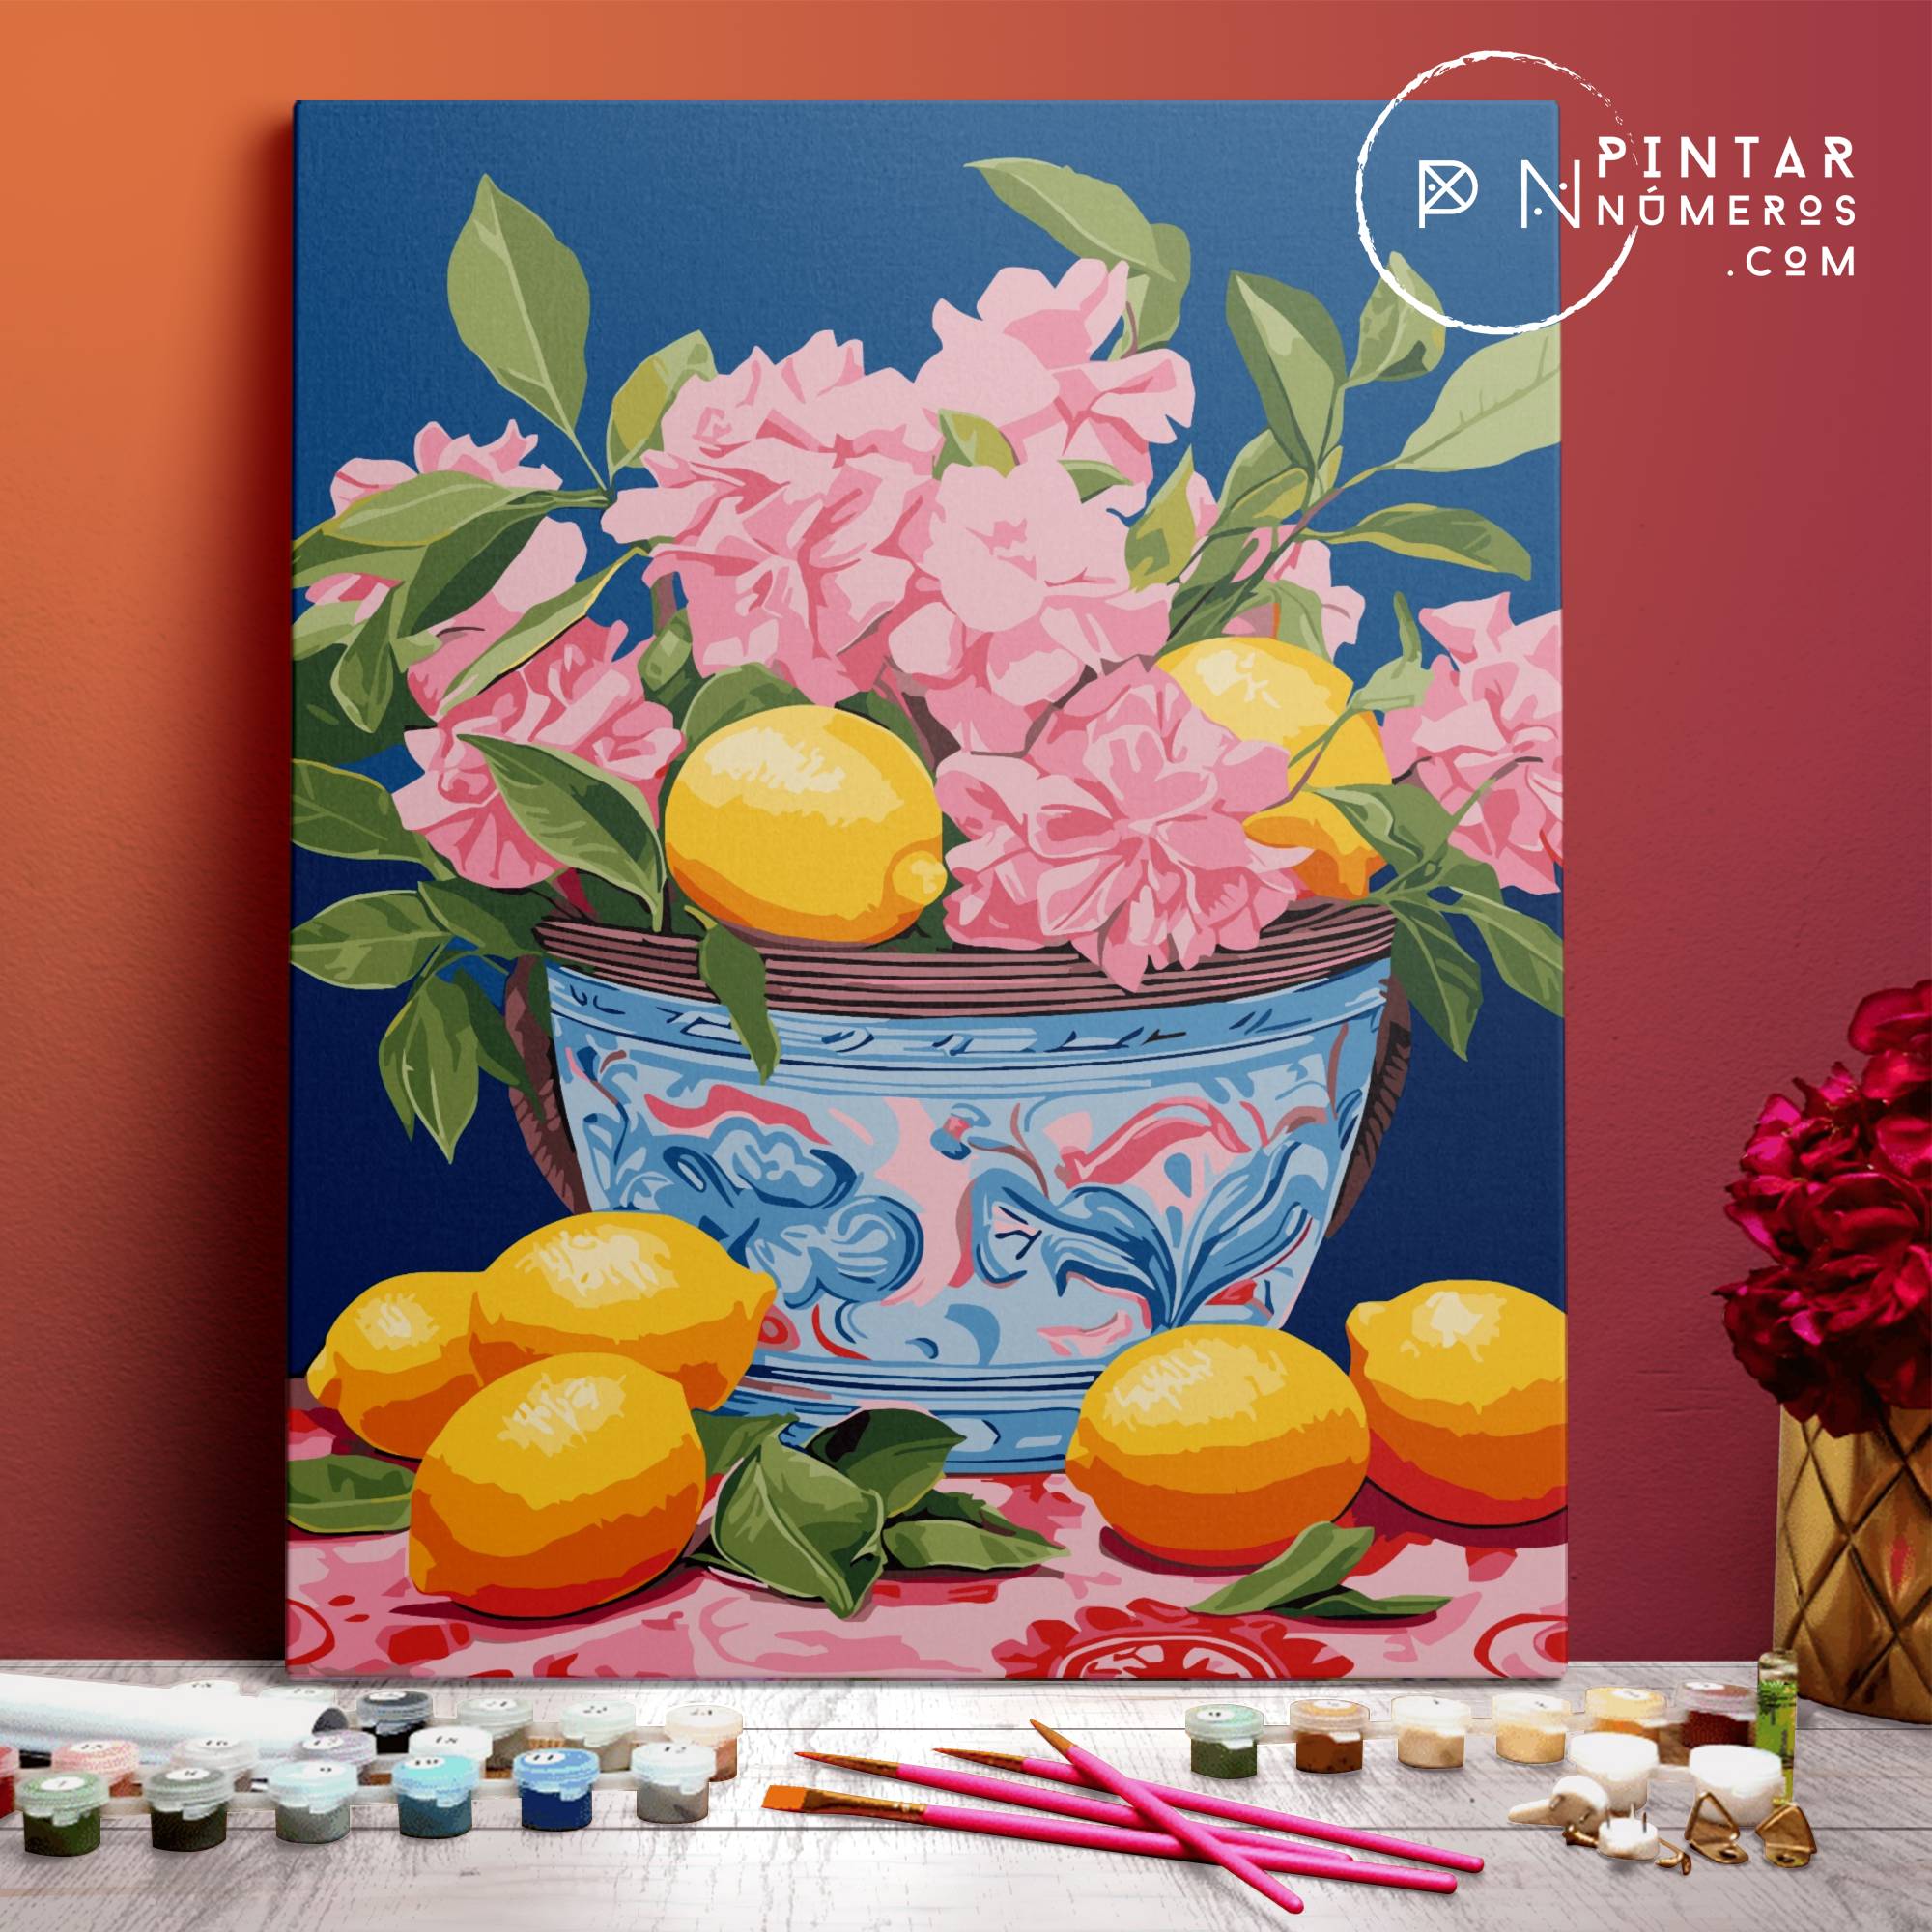 Flowers and Lemons - Paint Numbers®